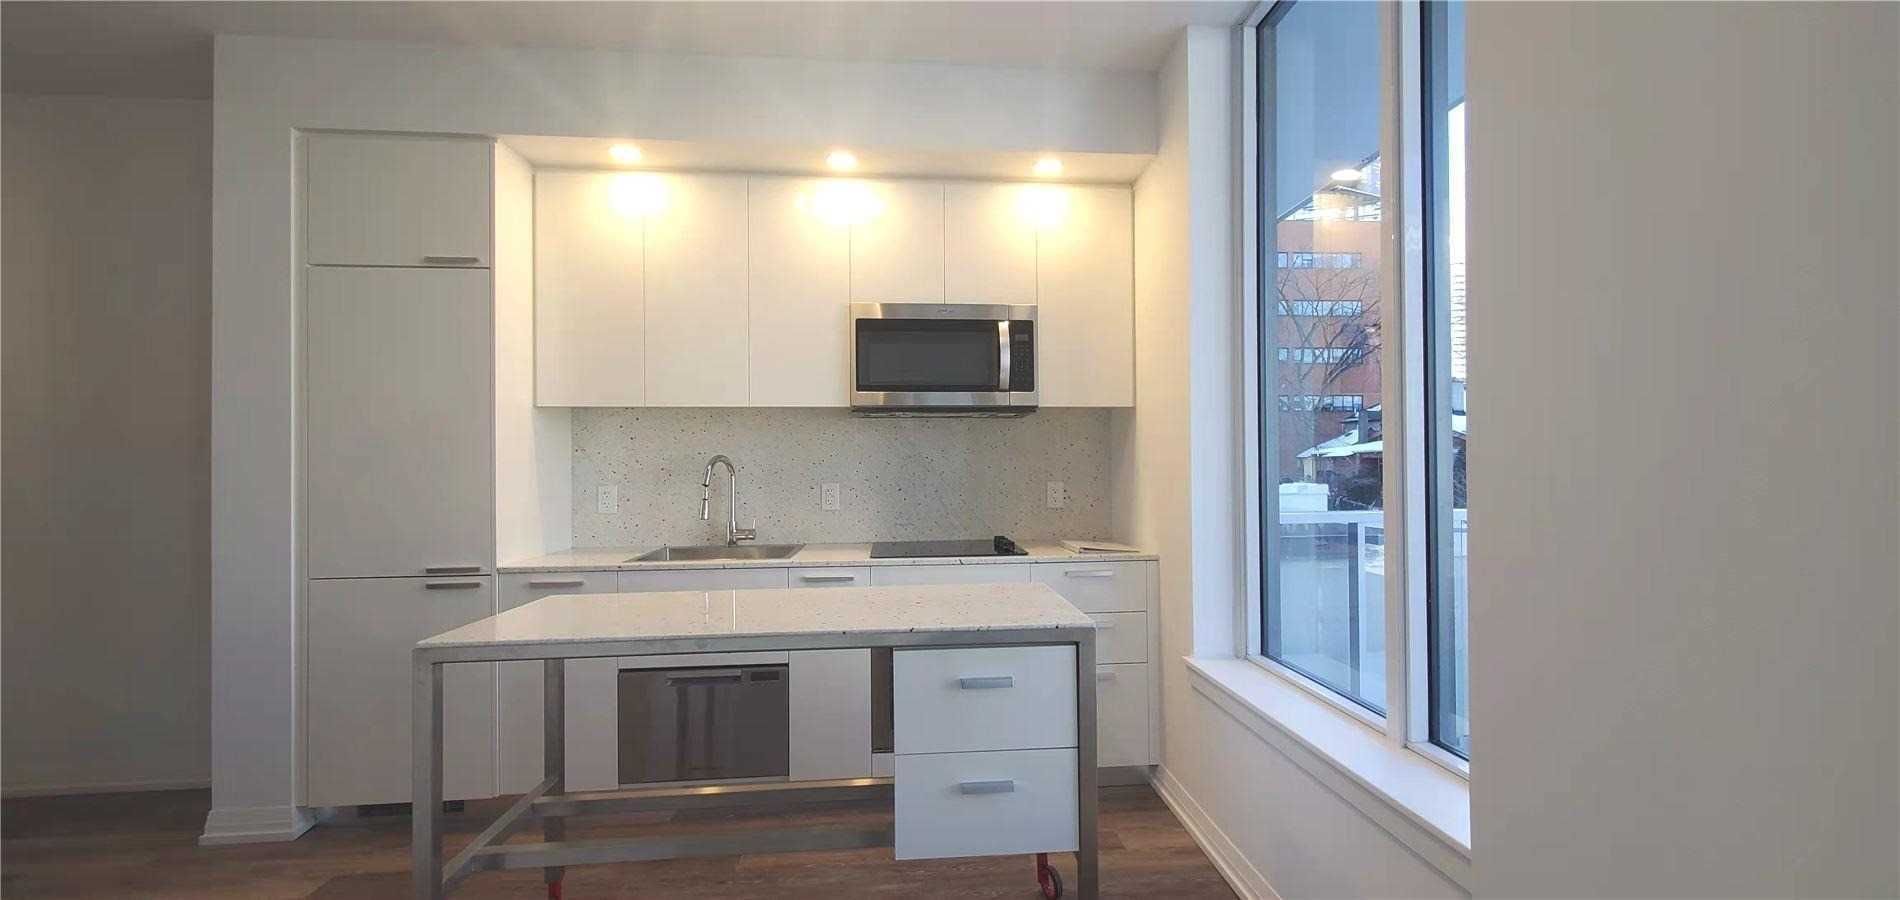 Main Photo: 203 75 Canterbury Place in Toronto: Willowdale West Condo for lease (Toronto C07)  : MLS®# C5534988